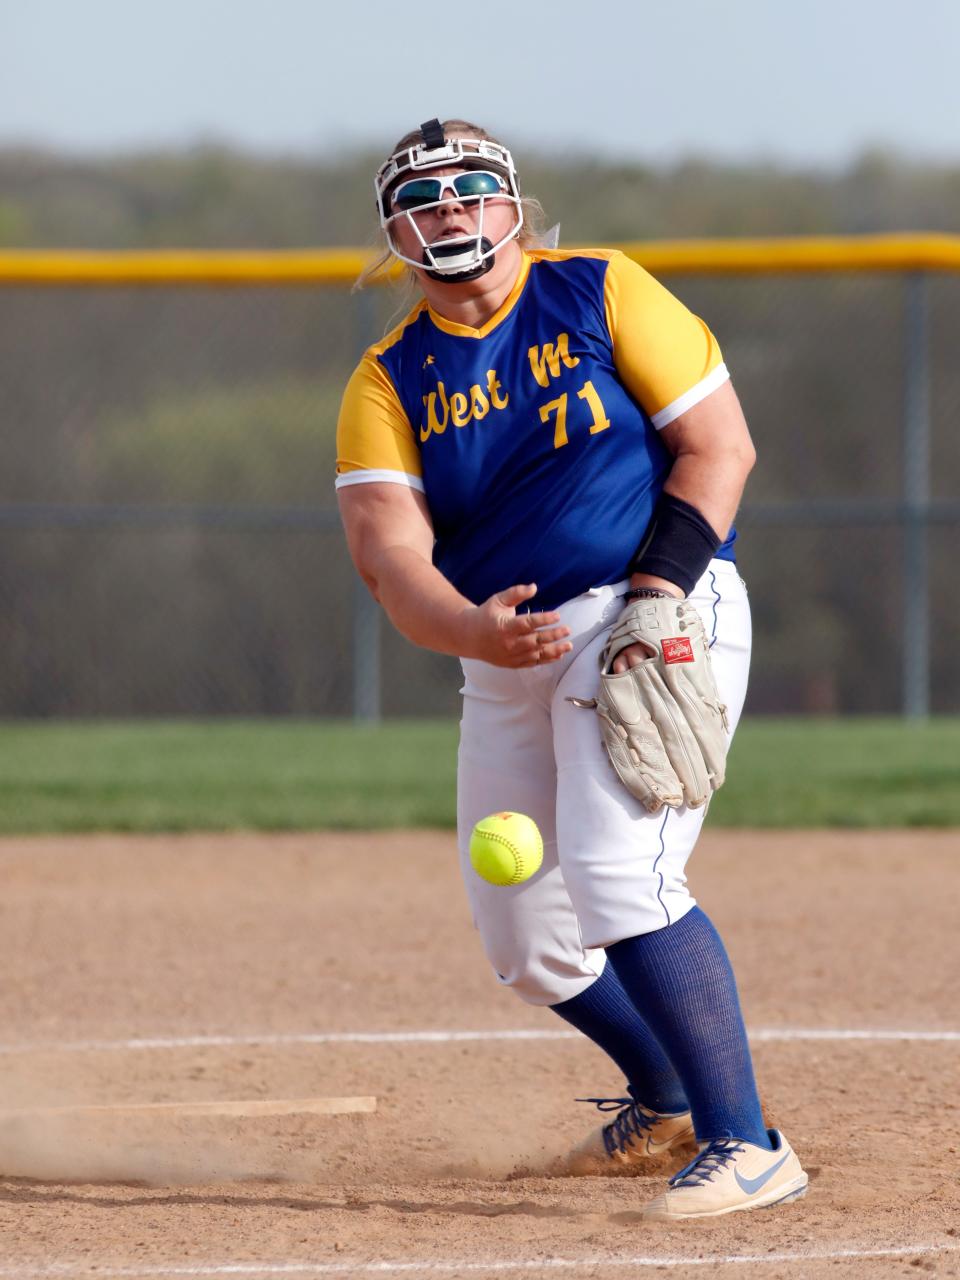 Cadence Puckett fires a pitch during West Muskingum's 15-9 loss to visiting Philo on Thursday in Falls Township.